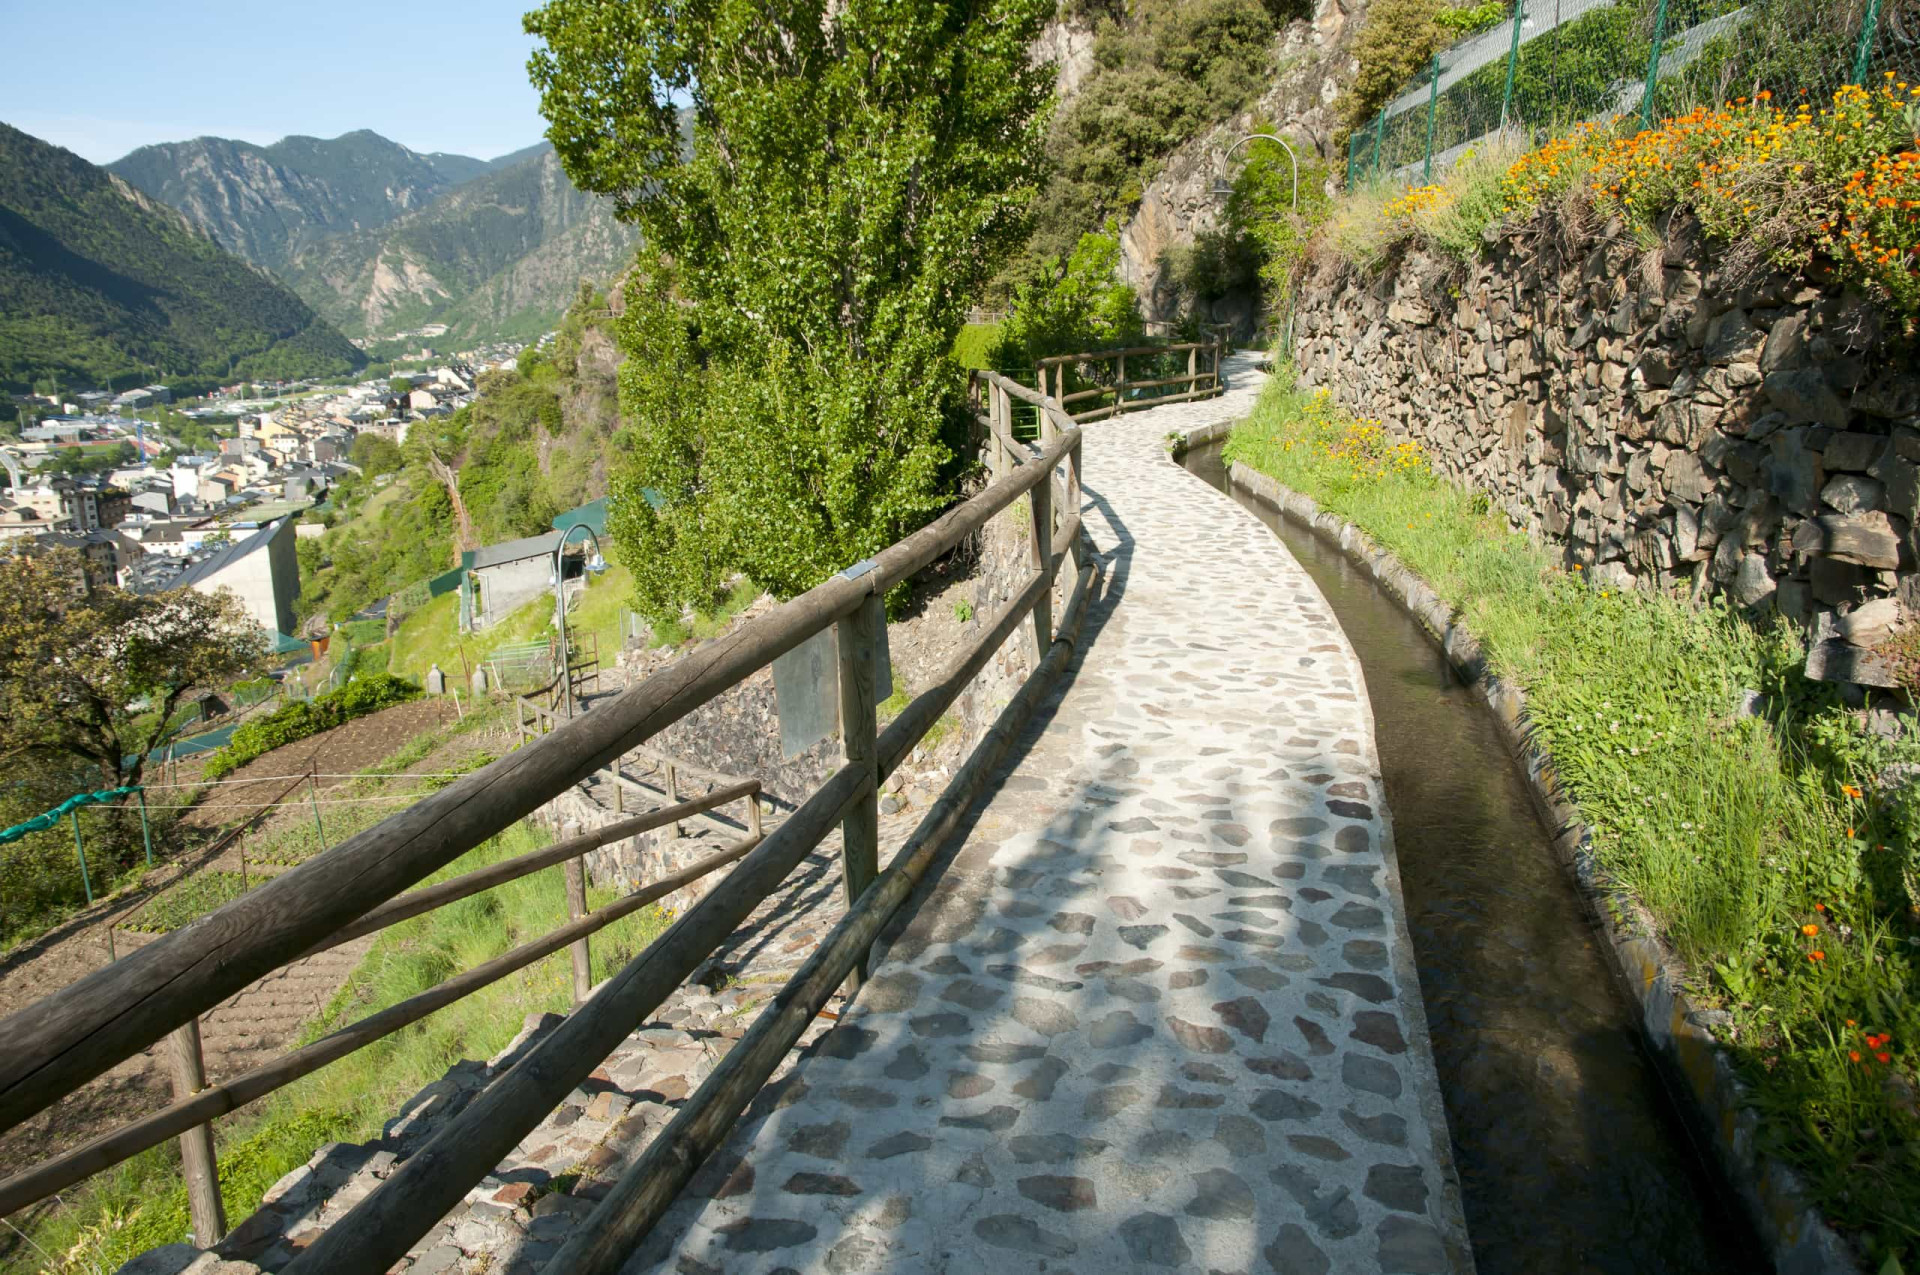 <p>To get the best views of Andorra la Vella and the surrounding area, check out the Sola Irrigation Canal Trail, which winds through the hills that rise up from the small city. Meandering along the canal trail is a perfect way to end an afternoon in the city.</p><p><a href="https://www.msn.com/en-za/community/channel/vid-7xx8mnucu55yw63we9va2gwr7uihbxwc68fxqp25x6tg4ftibpra?cvid=94631541bc0f4f89bfd59158d696ad7e">Follow us and access great exclusive content every day</a></p>